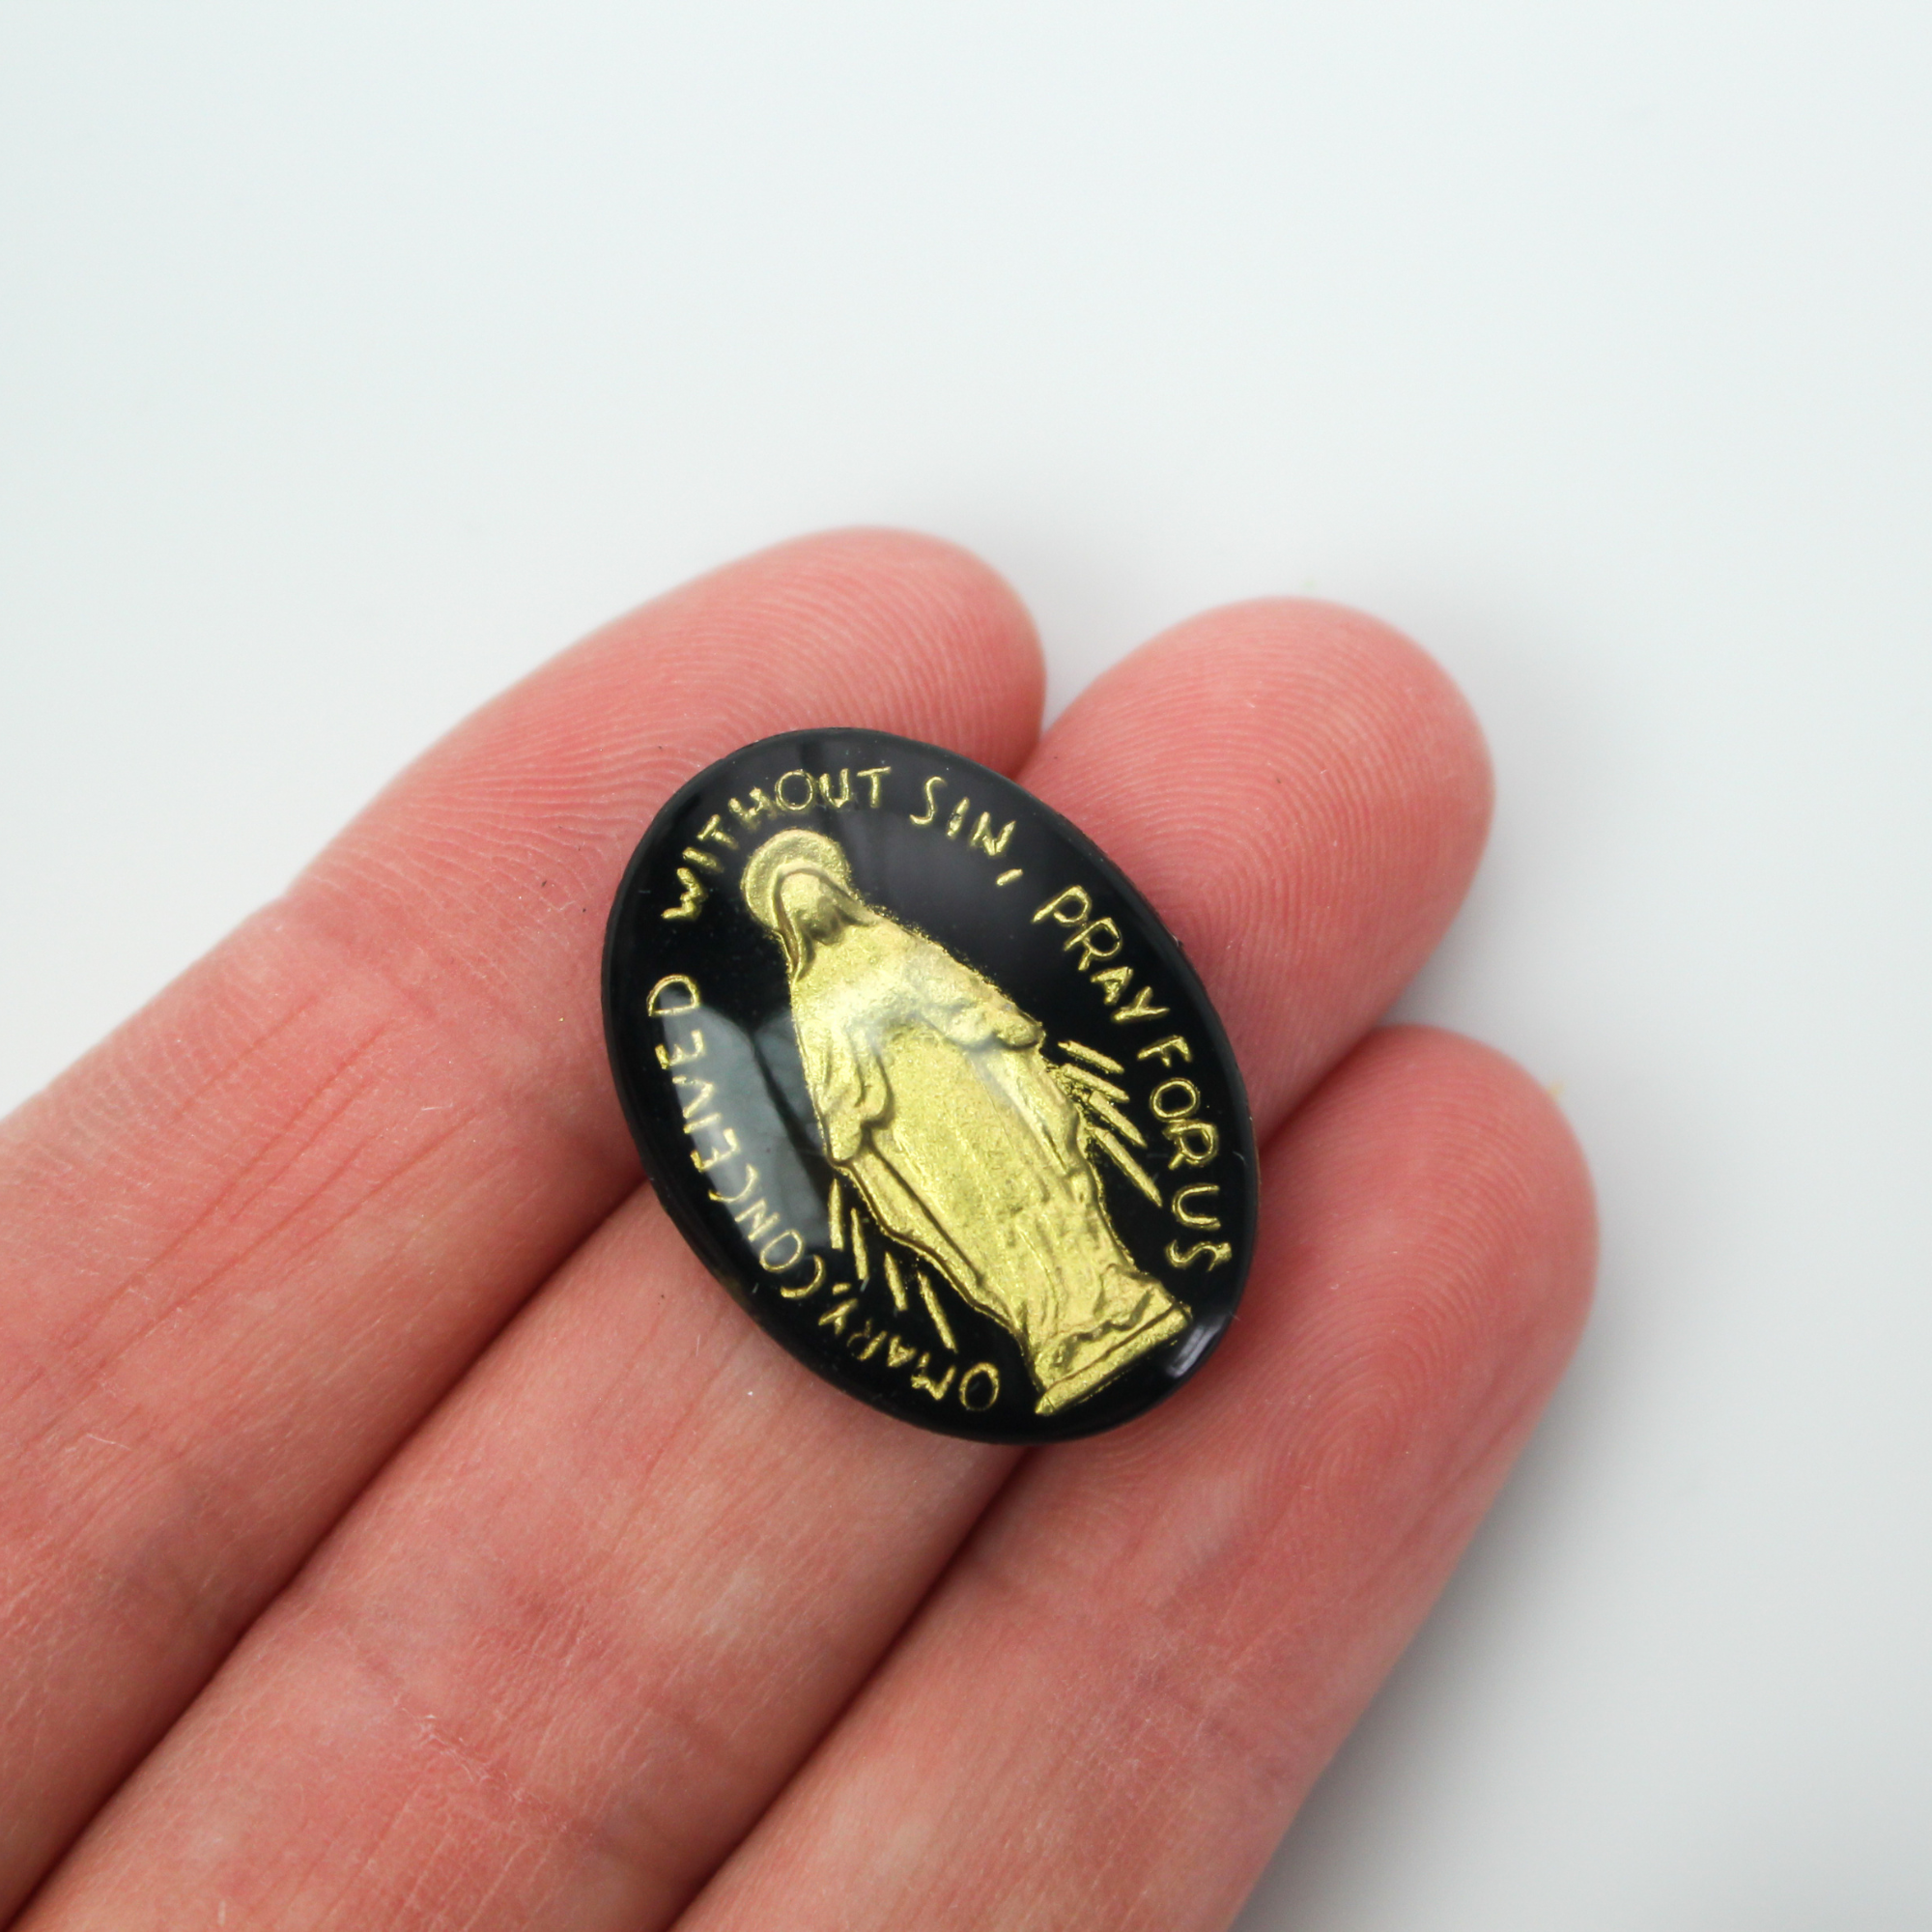 Glass cabochon of the Miraculous medal in a gold and black design. Hand pressed and painted in the Czech Republic